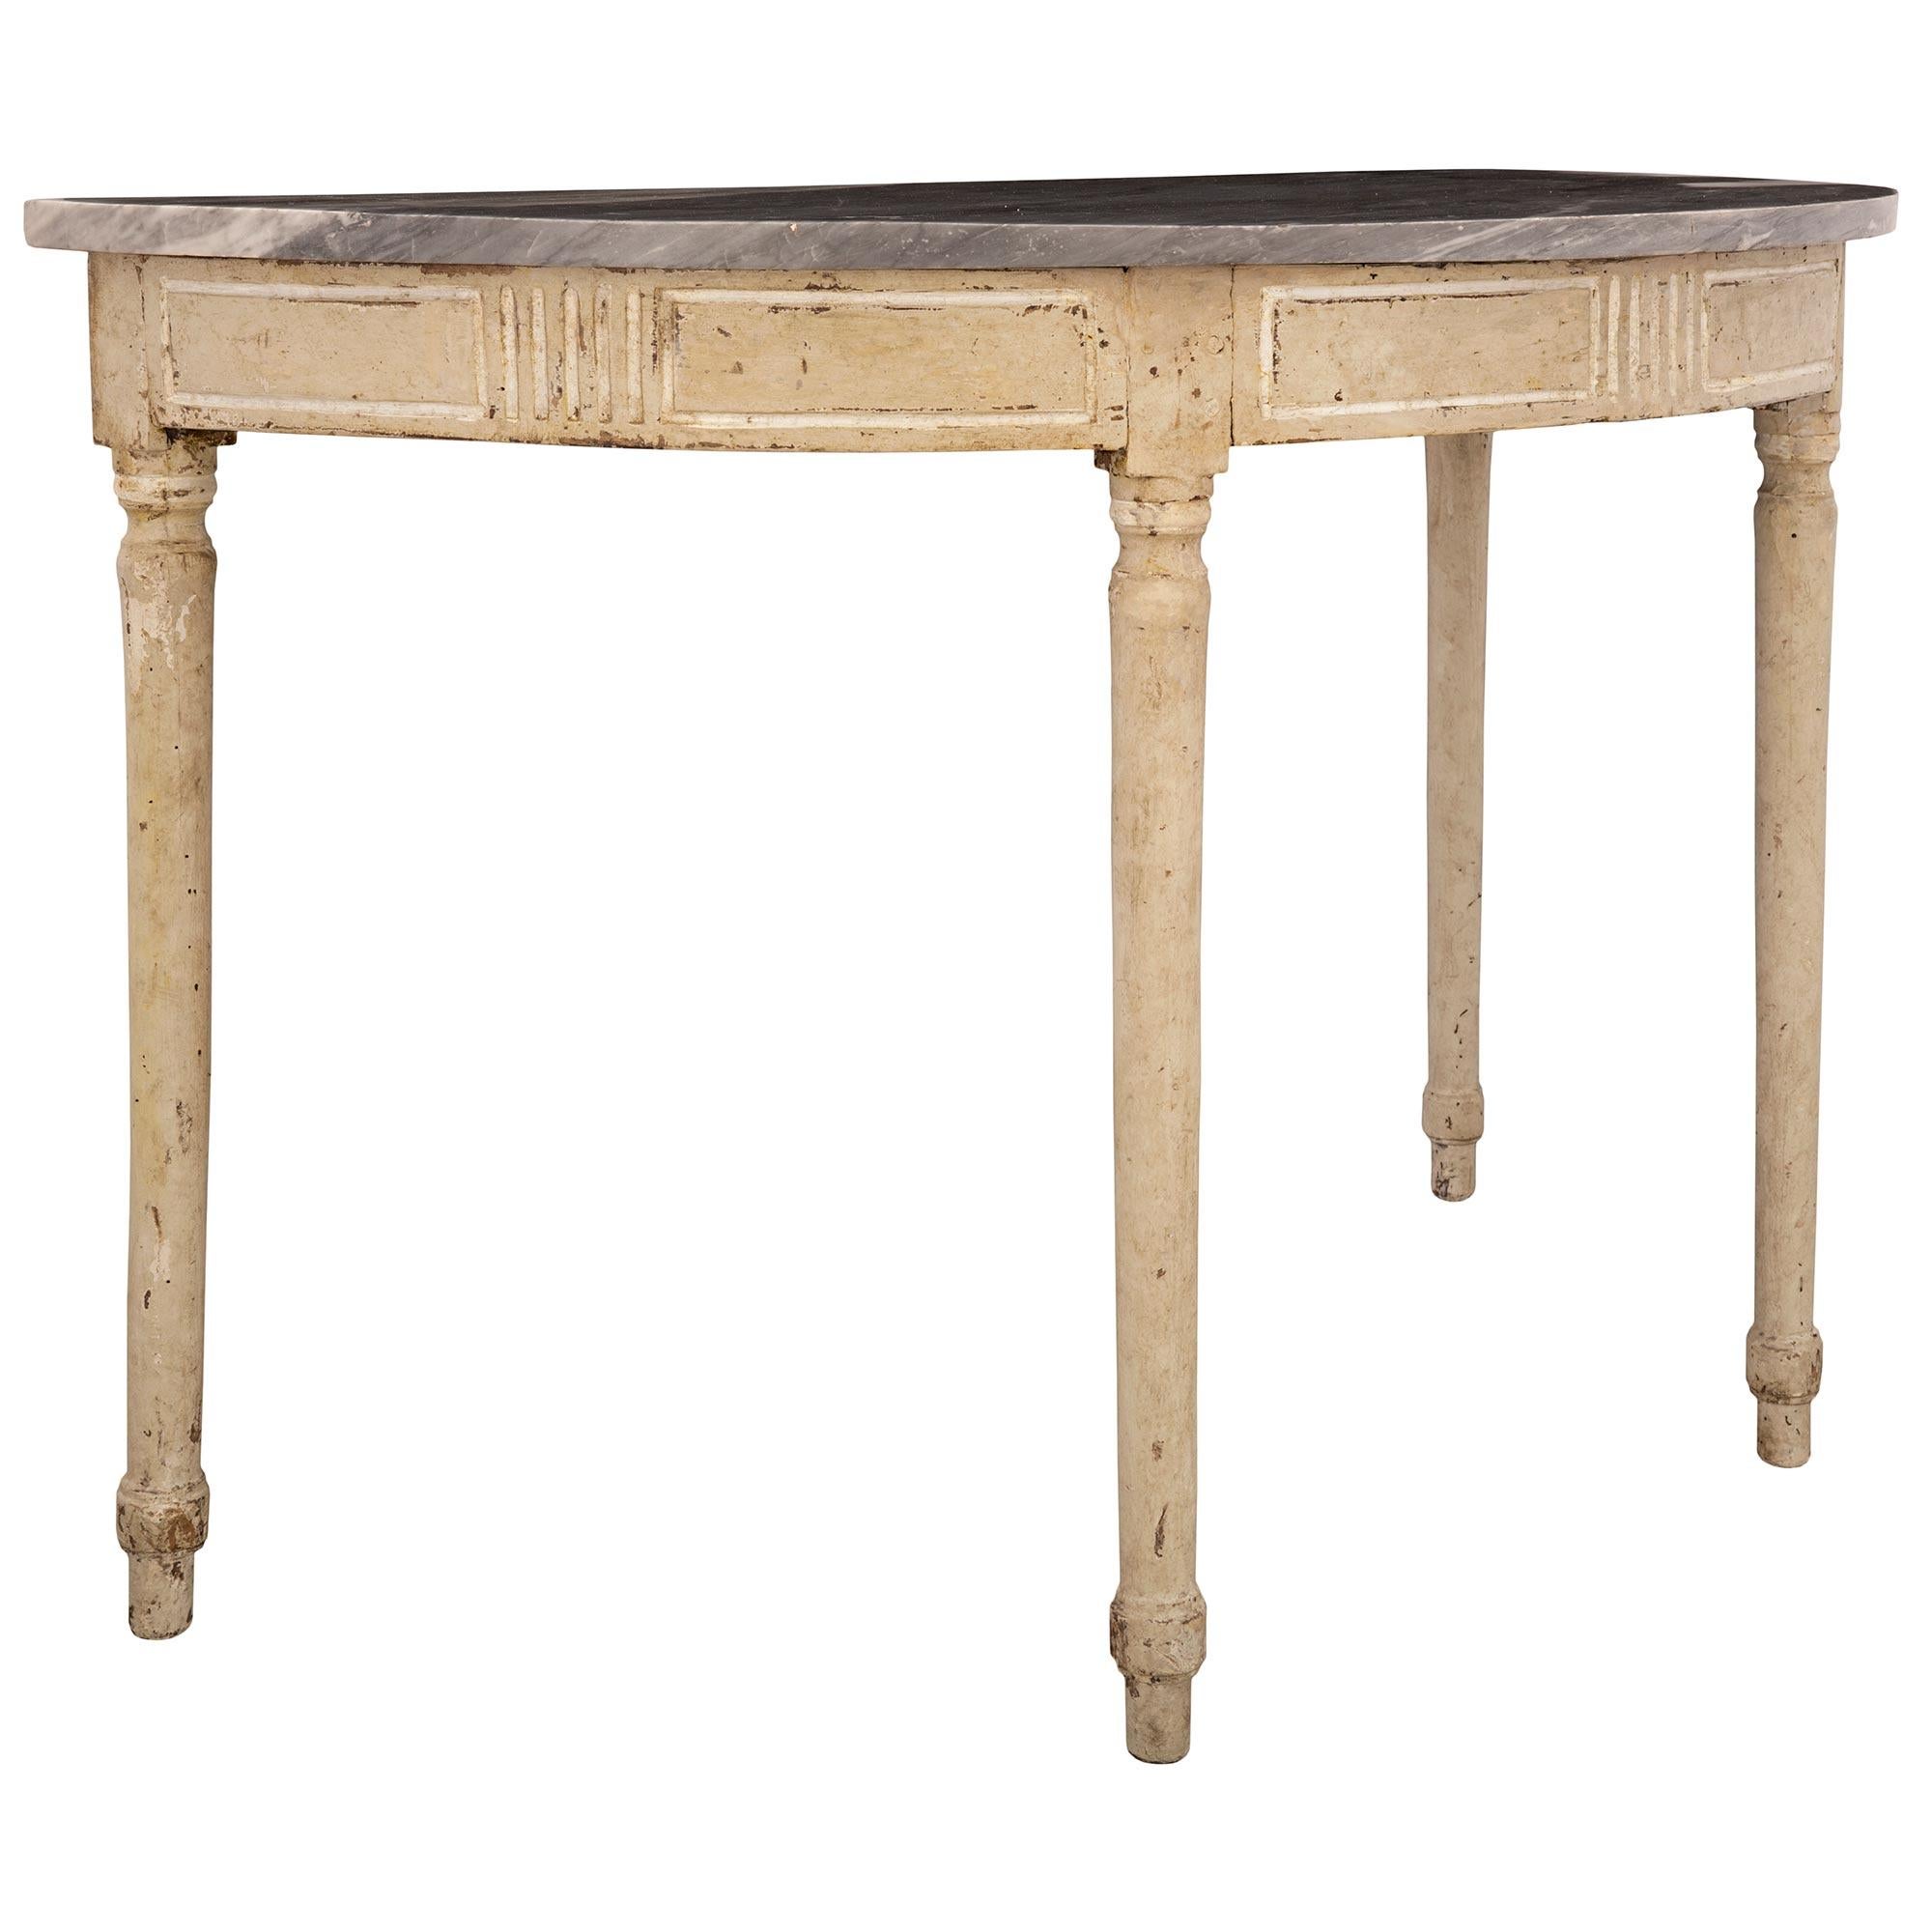 French 18th Century Louis XVI Period Patinated Wood and Marble Console In Good Condition For Sale In West Palm Beach, FL